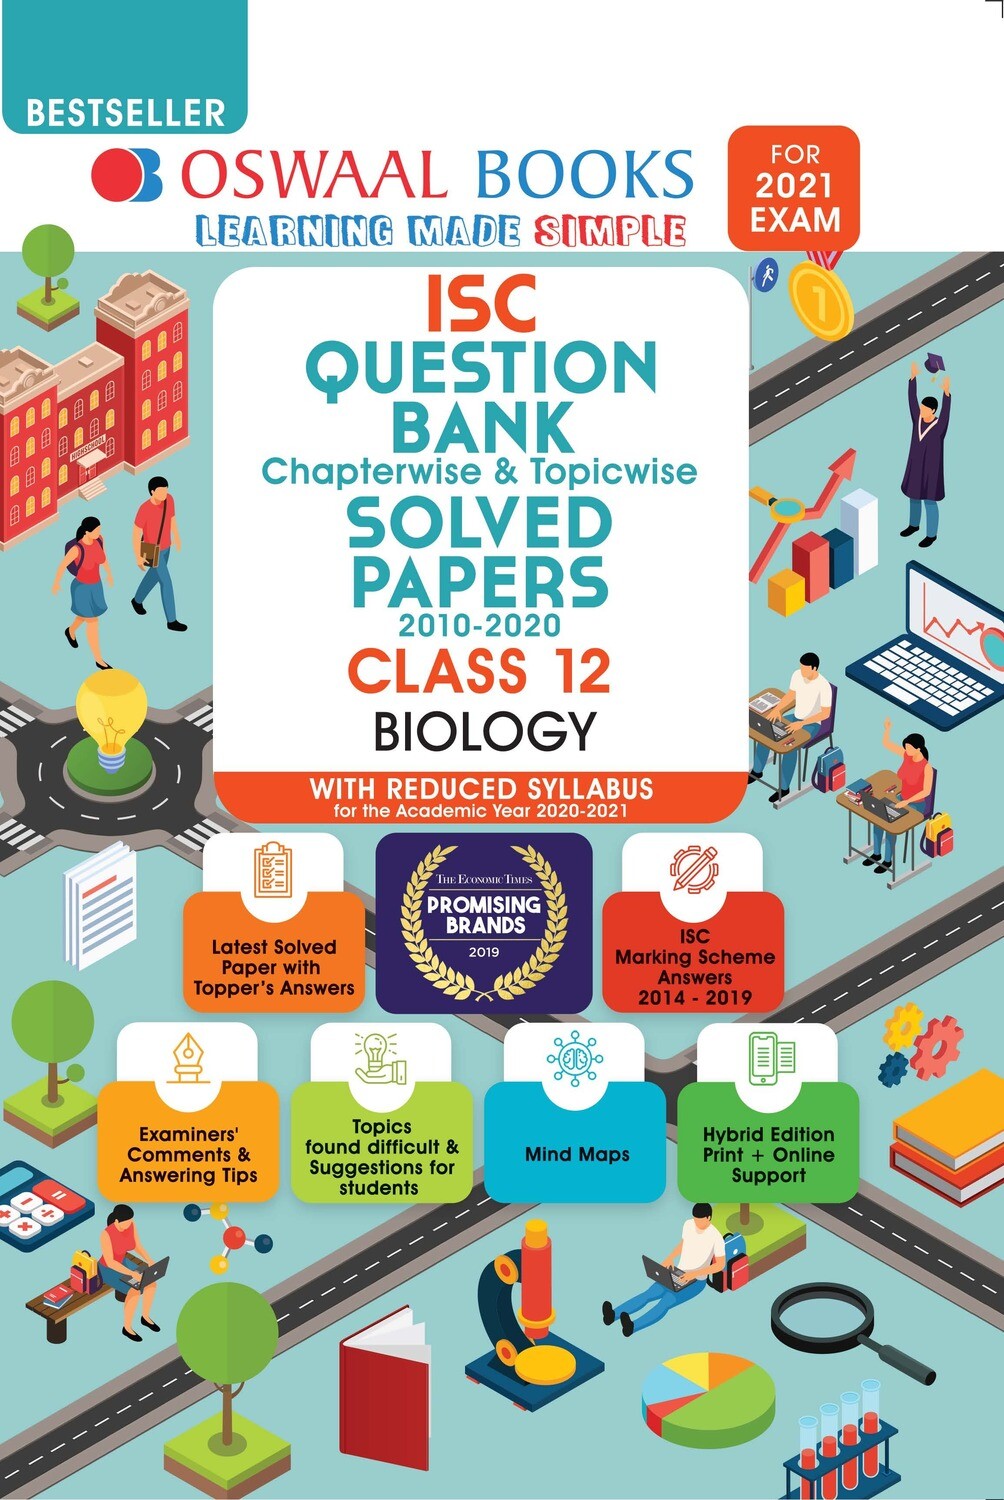 Buy e-book: Oswaal ISC Question Bank Chapterwise & Topicwise Solved Papers, Biology, Class 12 (Reduced Syllabus)